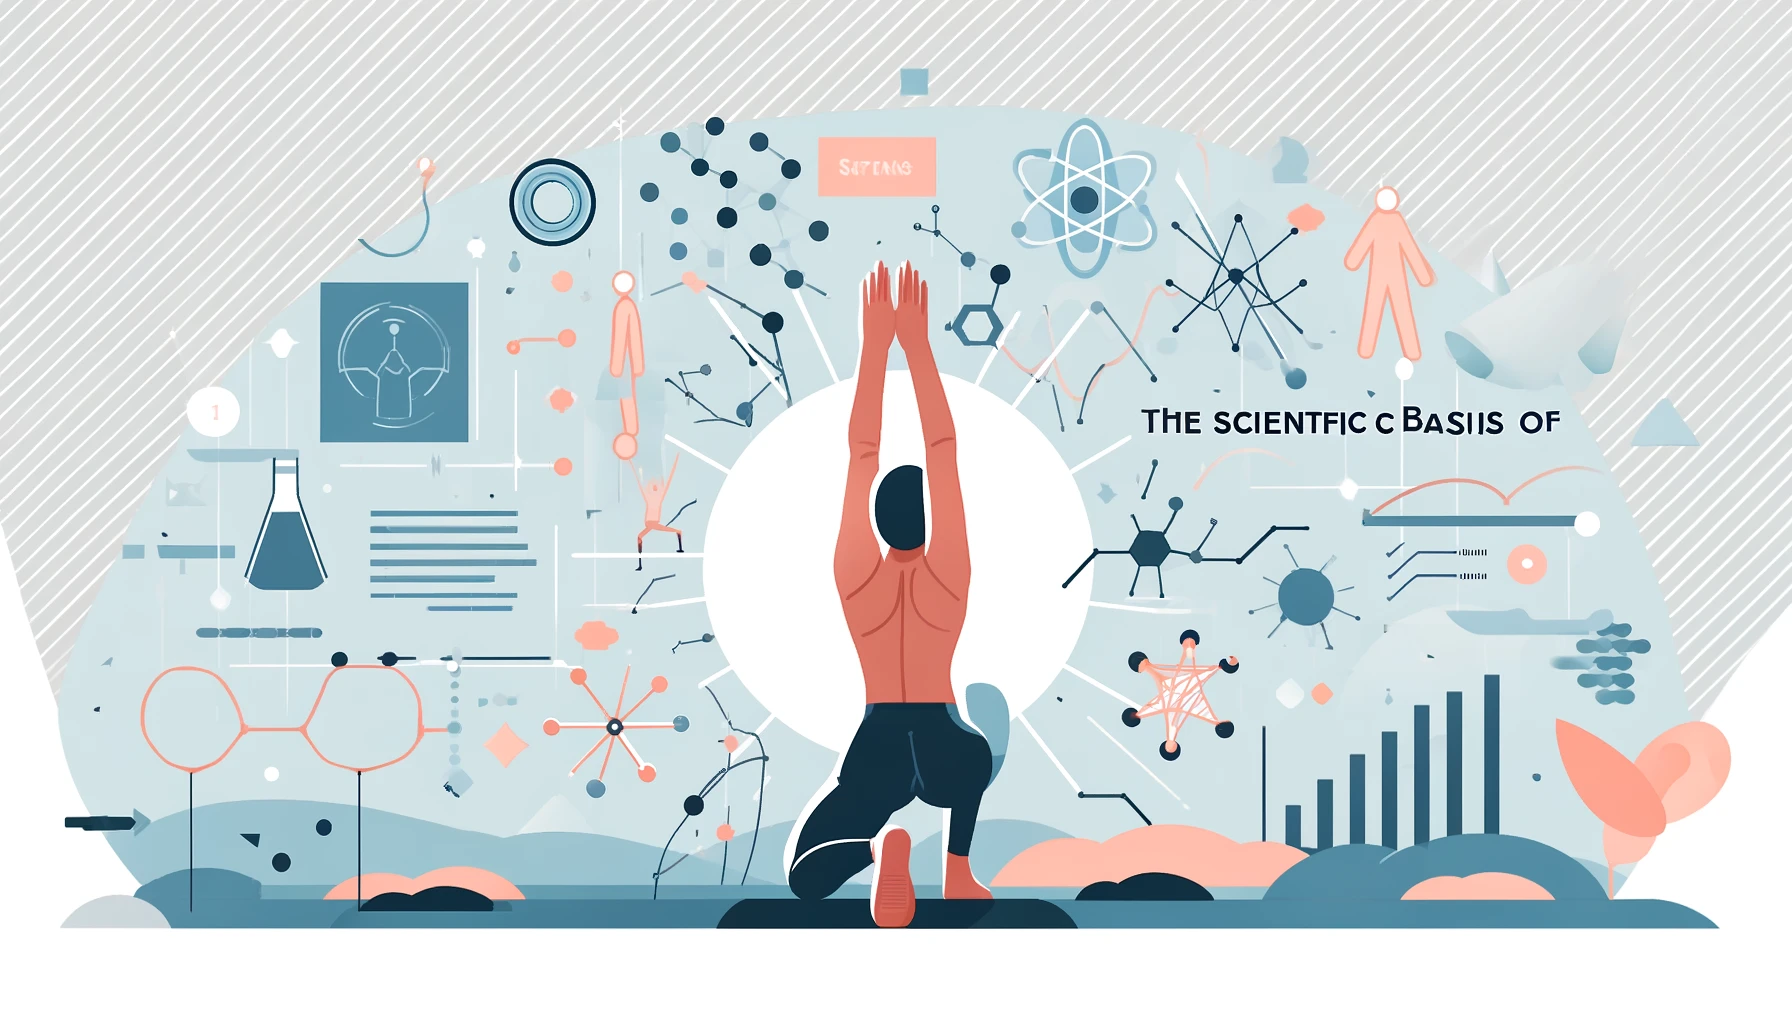 A simple, wide illustration for a blog header, depicting the concept of 'The Scientific Basis of Stretching'. The image should feature a person of ambiguous gender, performing a stretching exercise while surrounded by visual elements like graphs or molecular structures to symbolize scientific concepts. The setting should be minimalistic with a focus on clarity and scientific themes, using light and modern colors to enhance the educational aspect of stretching.